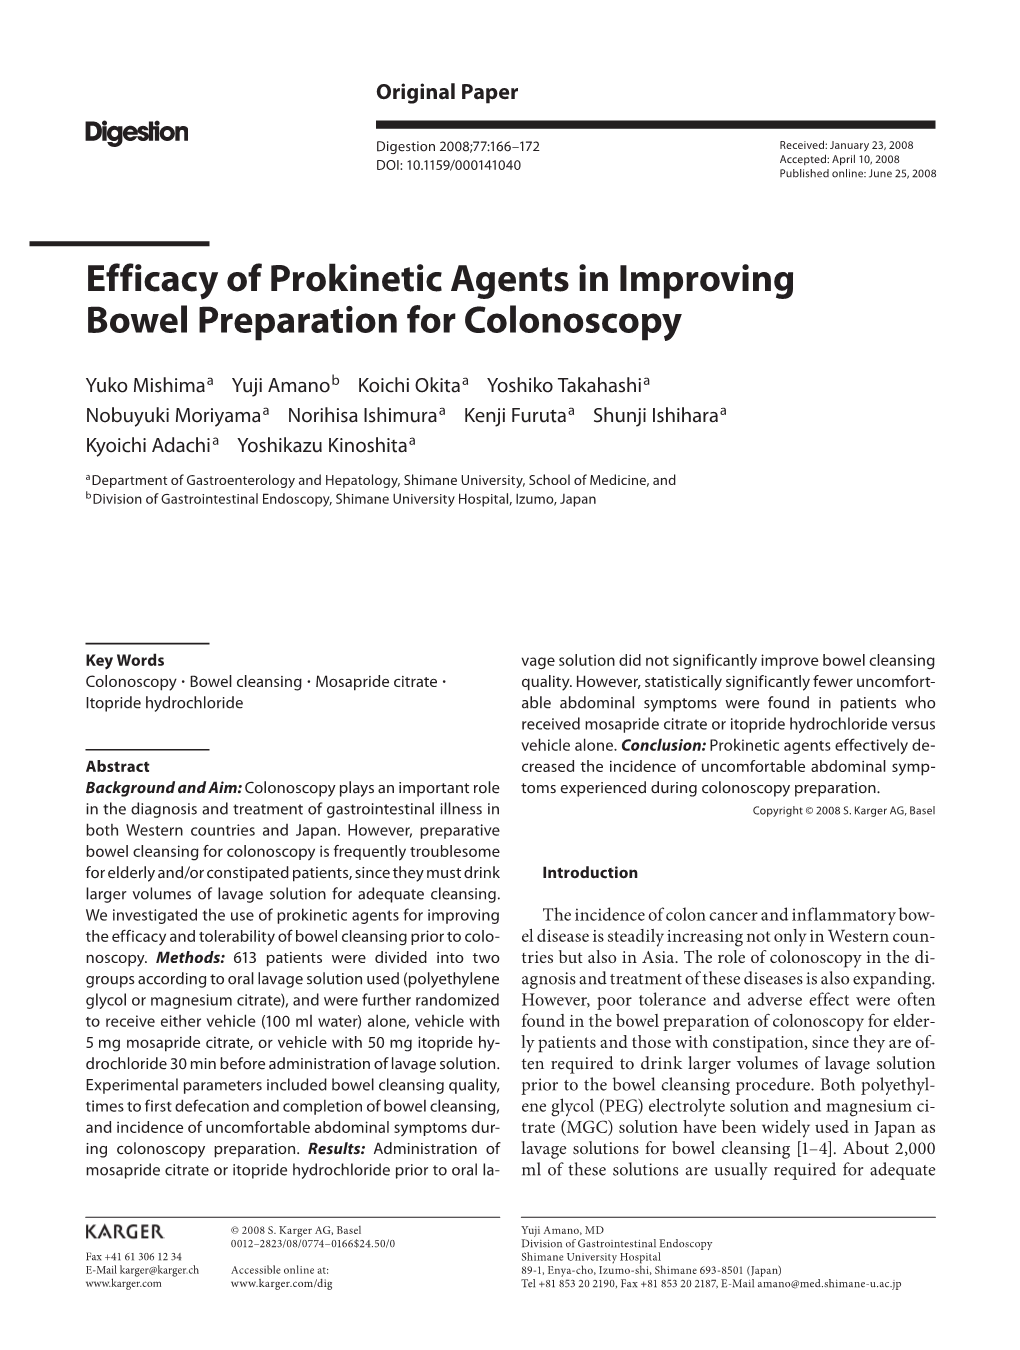 Efficacy of Prokinetic Agents in Improving Bowel Preparation for Colonoscopy